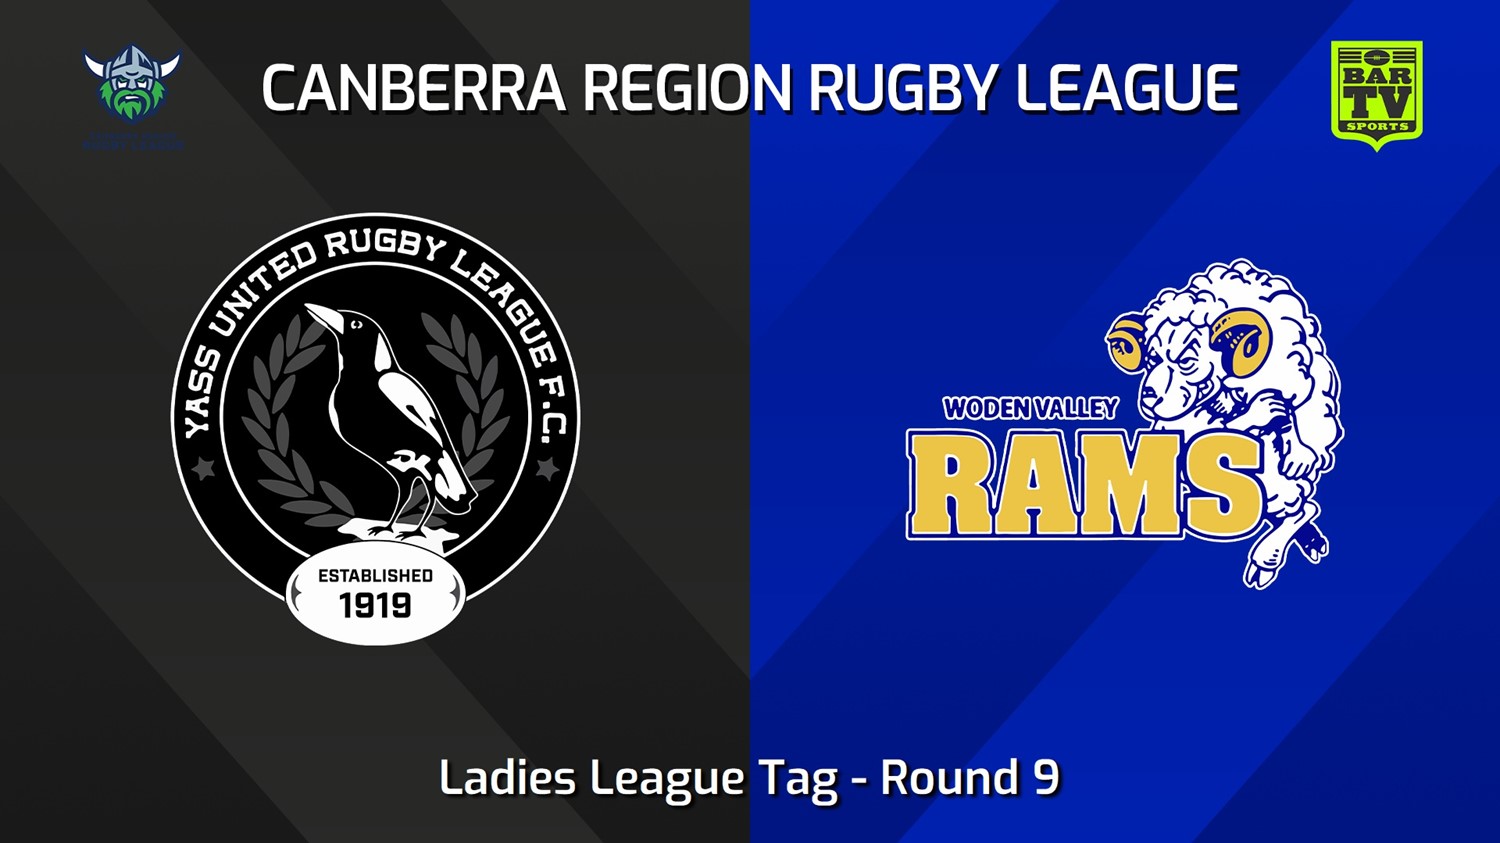 240601-video-Canberra Round 9 - Ladies League Tag - Yass Magpies v Woden Valley Rams Slate Image